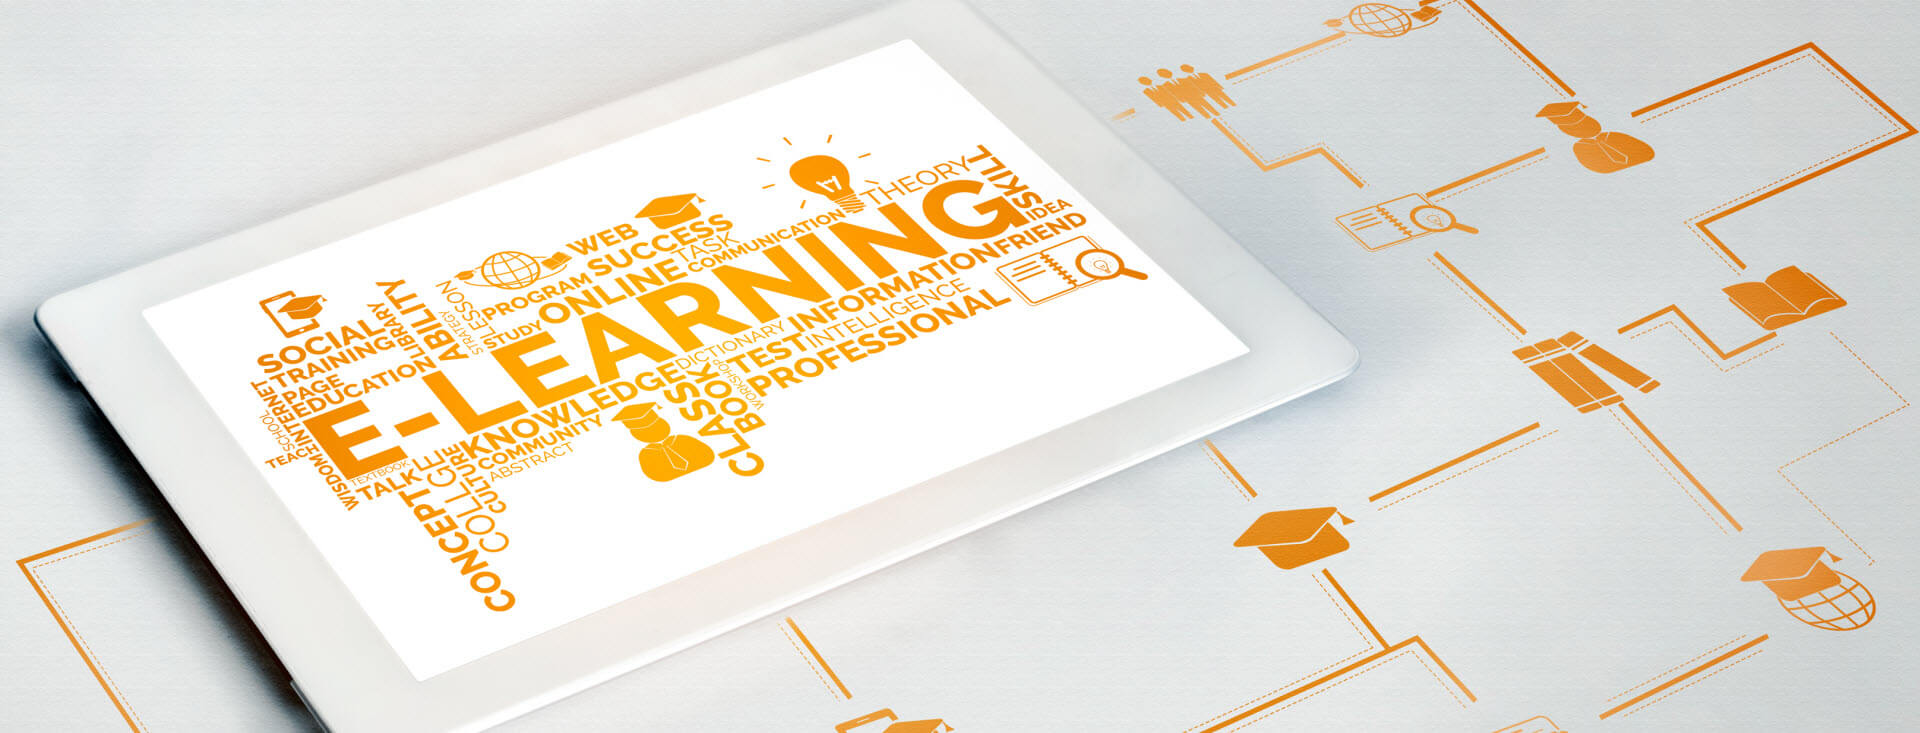 Top E-learning Trends in 2018